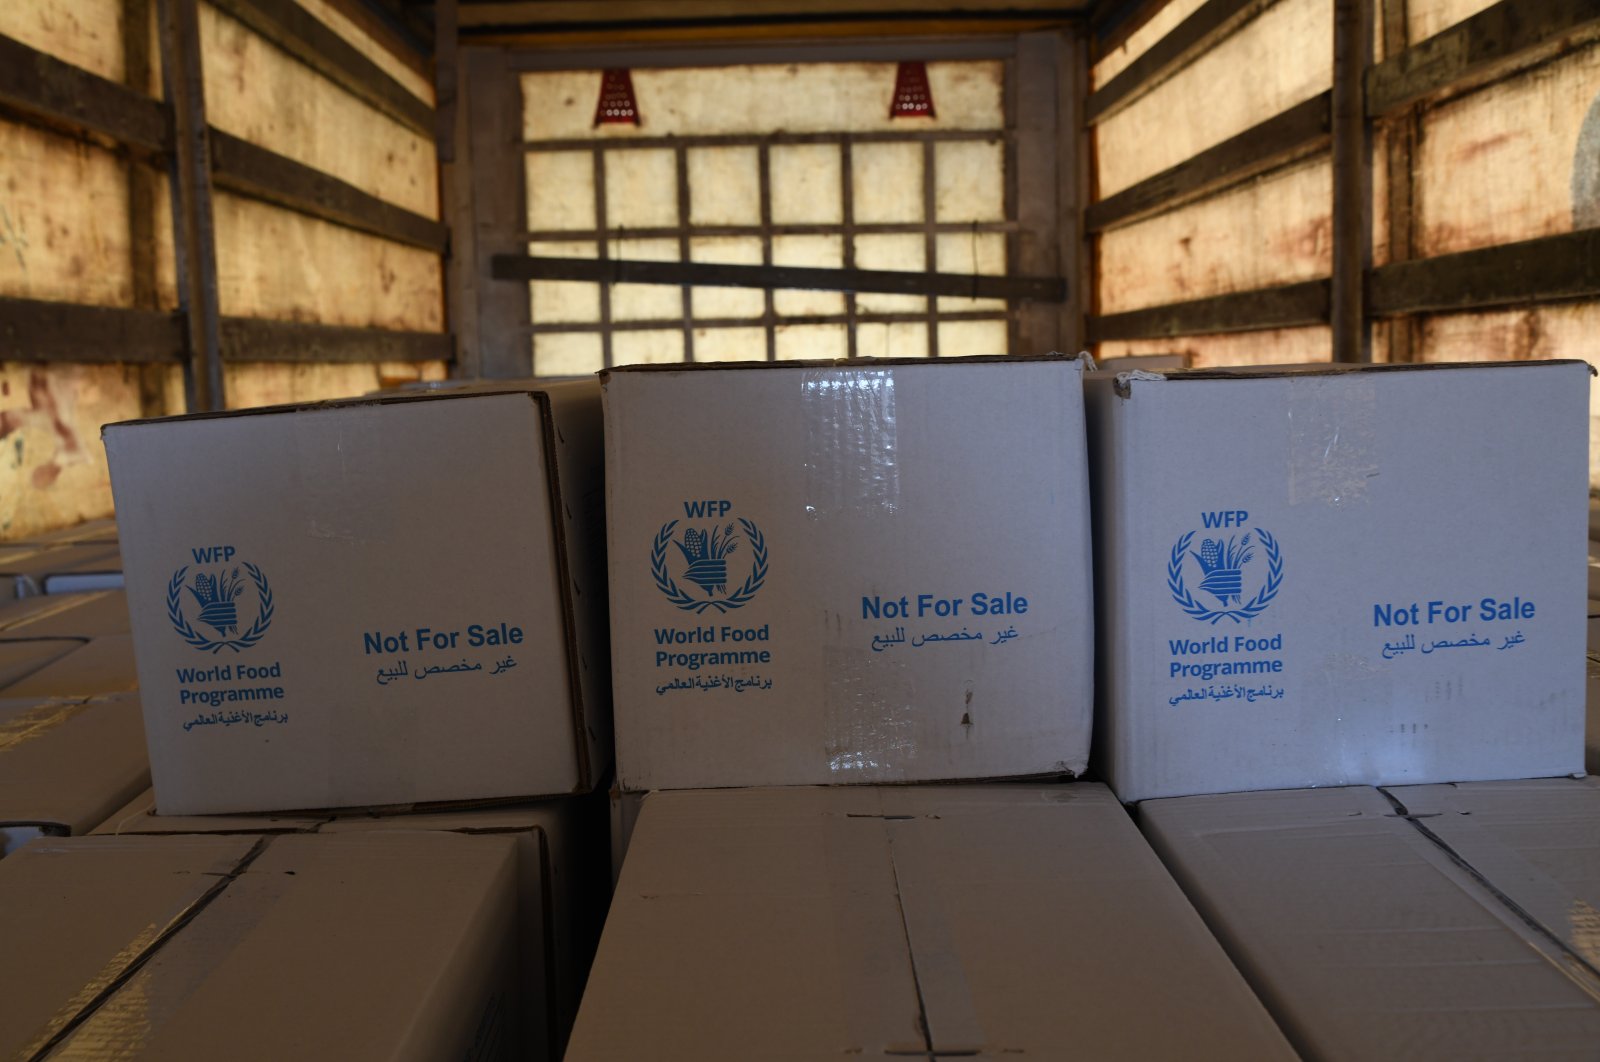 Trucks loaded with humanitarian aid provided by the United Nations World Food Programme enter Northern Syria through Bab al-Hawa crossing, June 22, 2021. (REUTERS Photo)